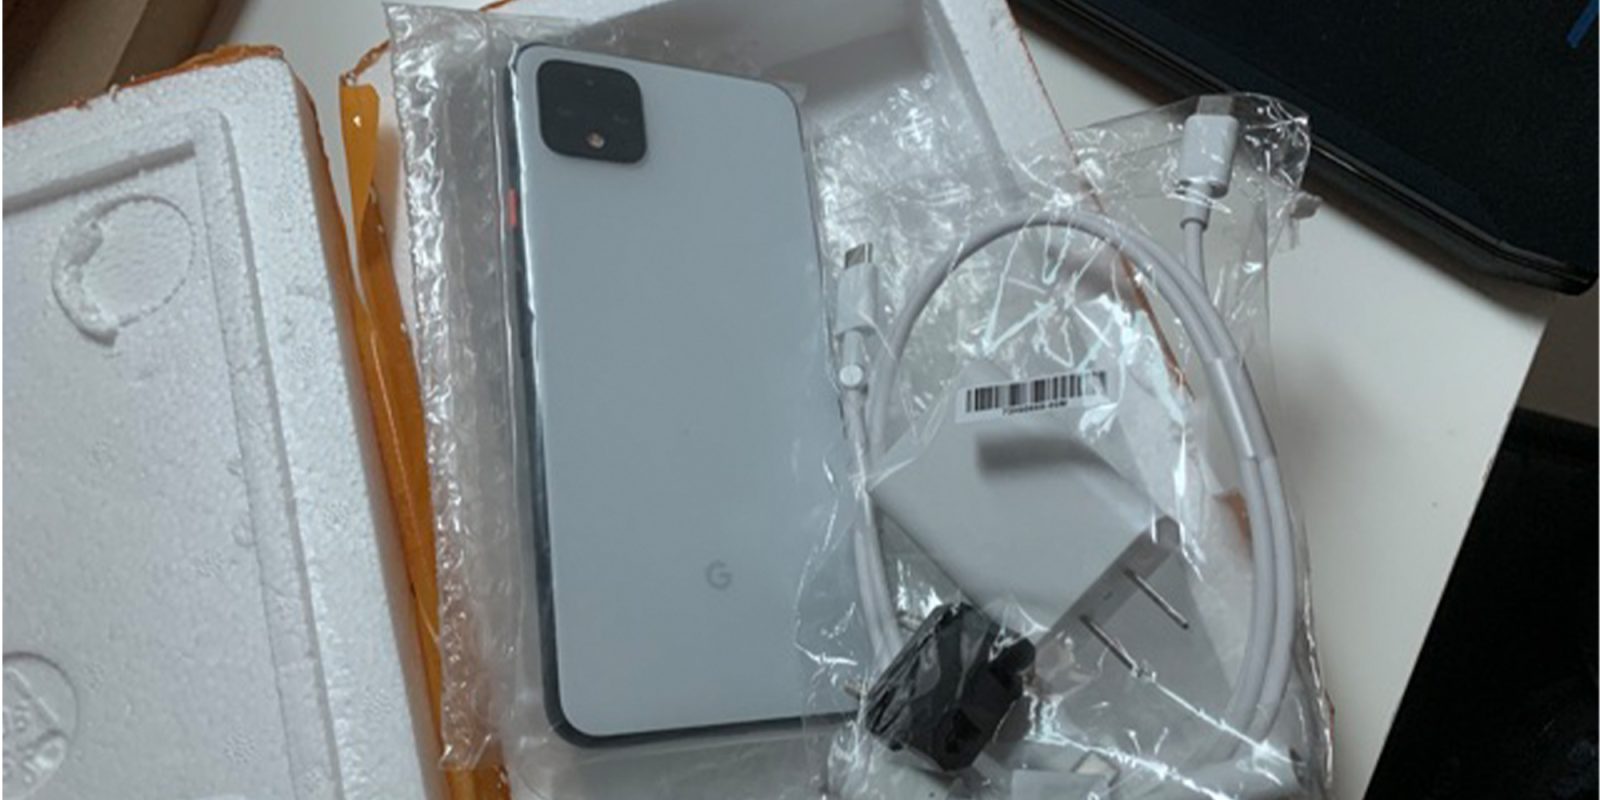 Pixel 4 Demo Units Are Now Going On Sale From Shady Sellers 9to5google